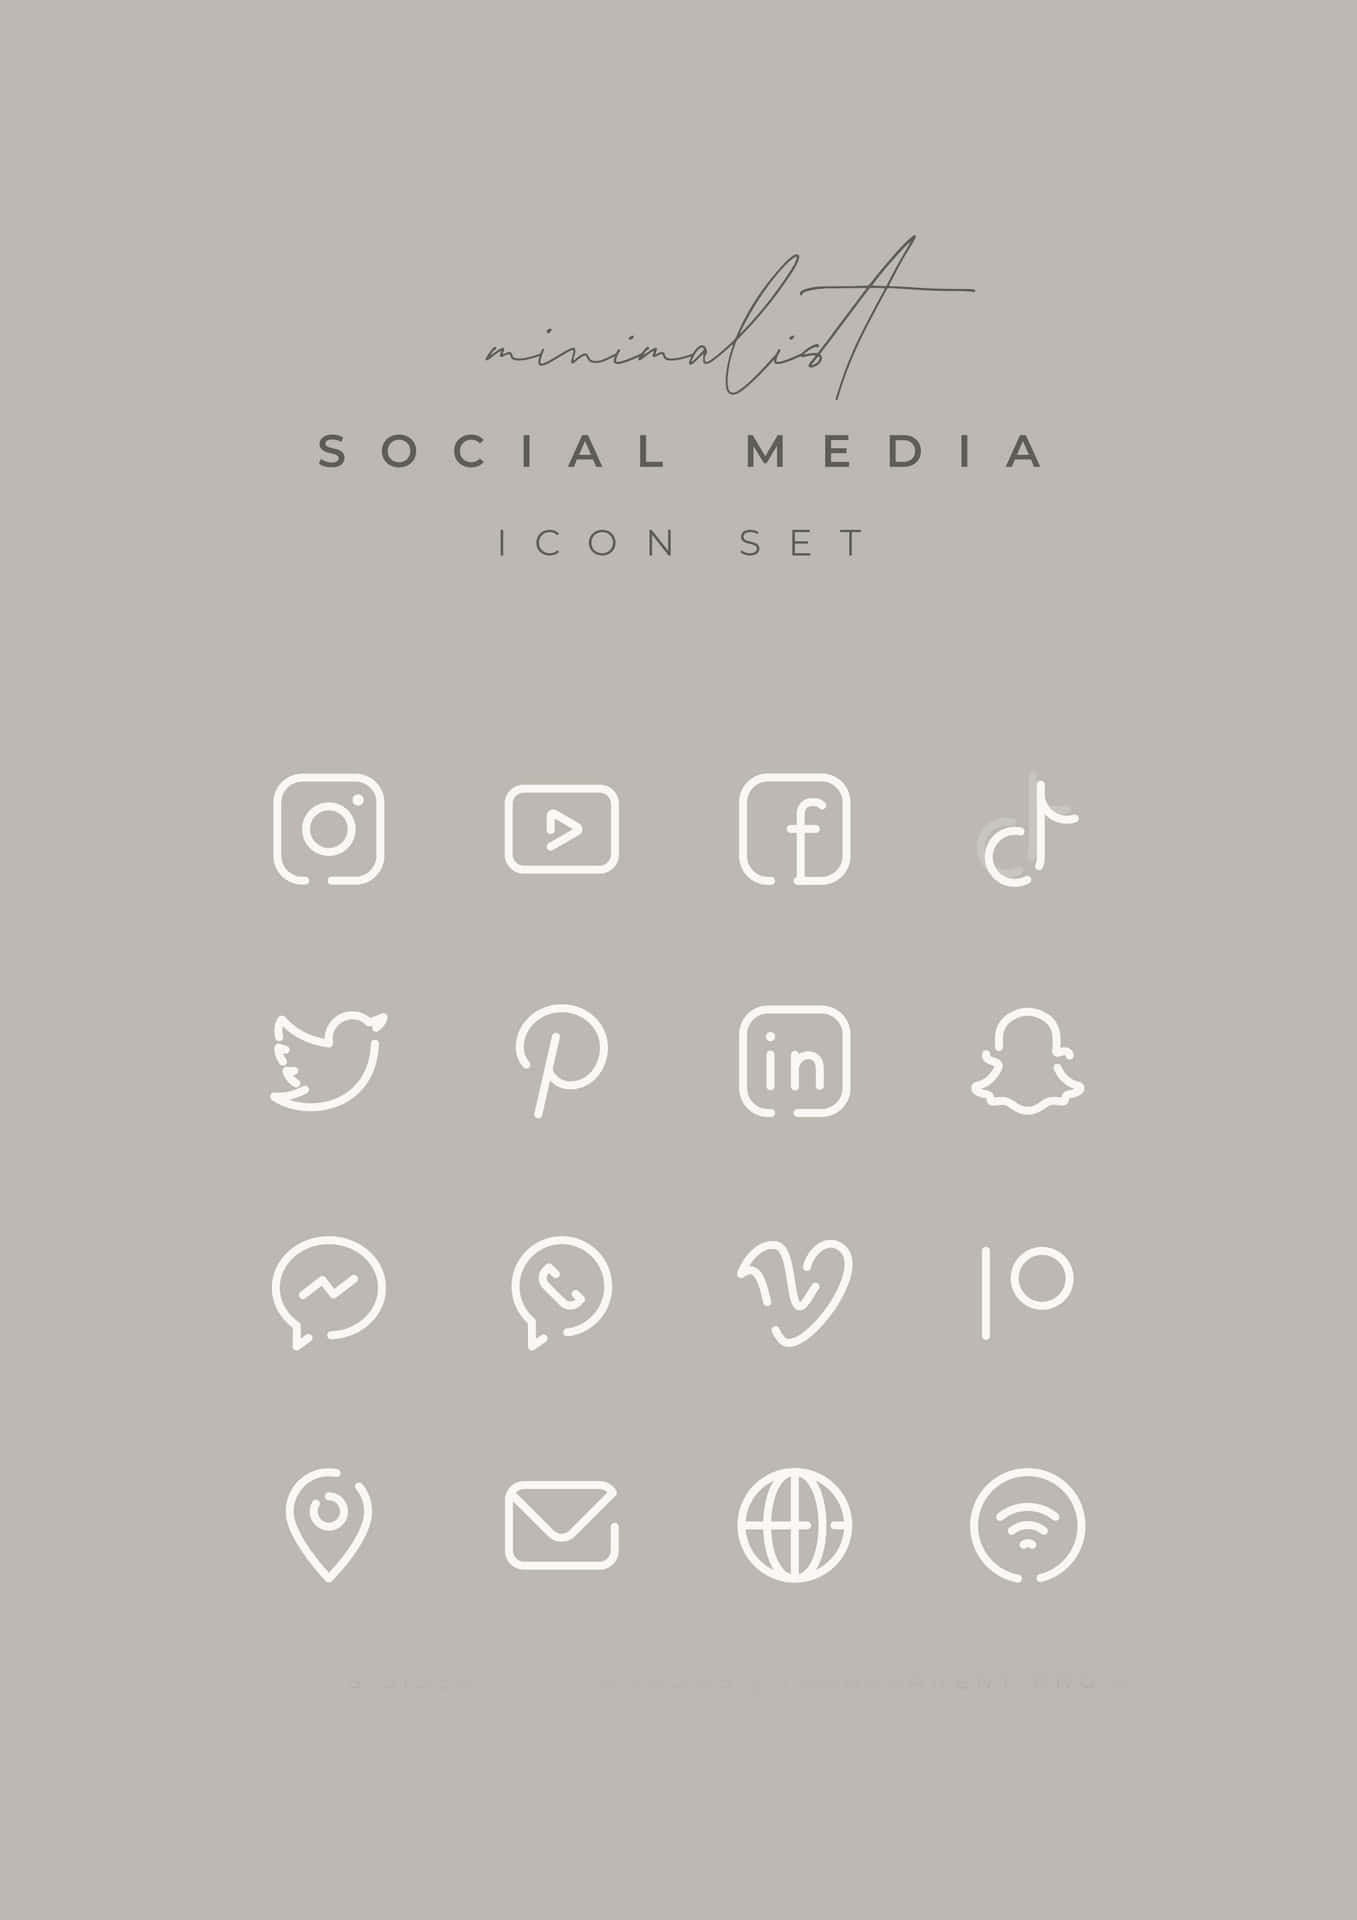 Stay Connected through Social Media Apps Wallpaper